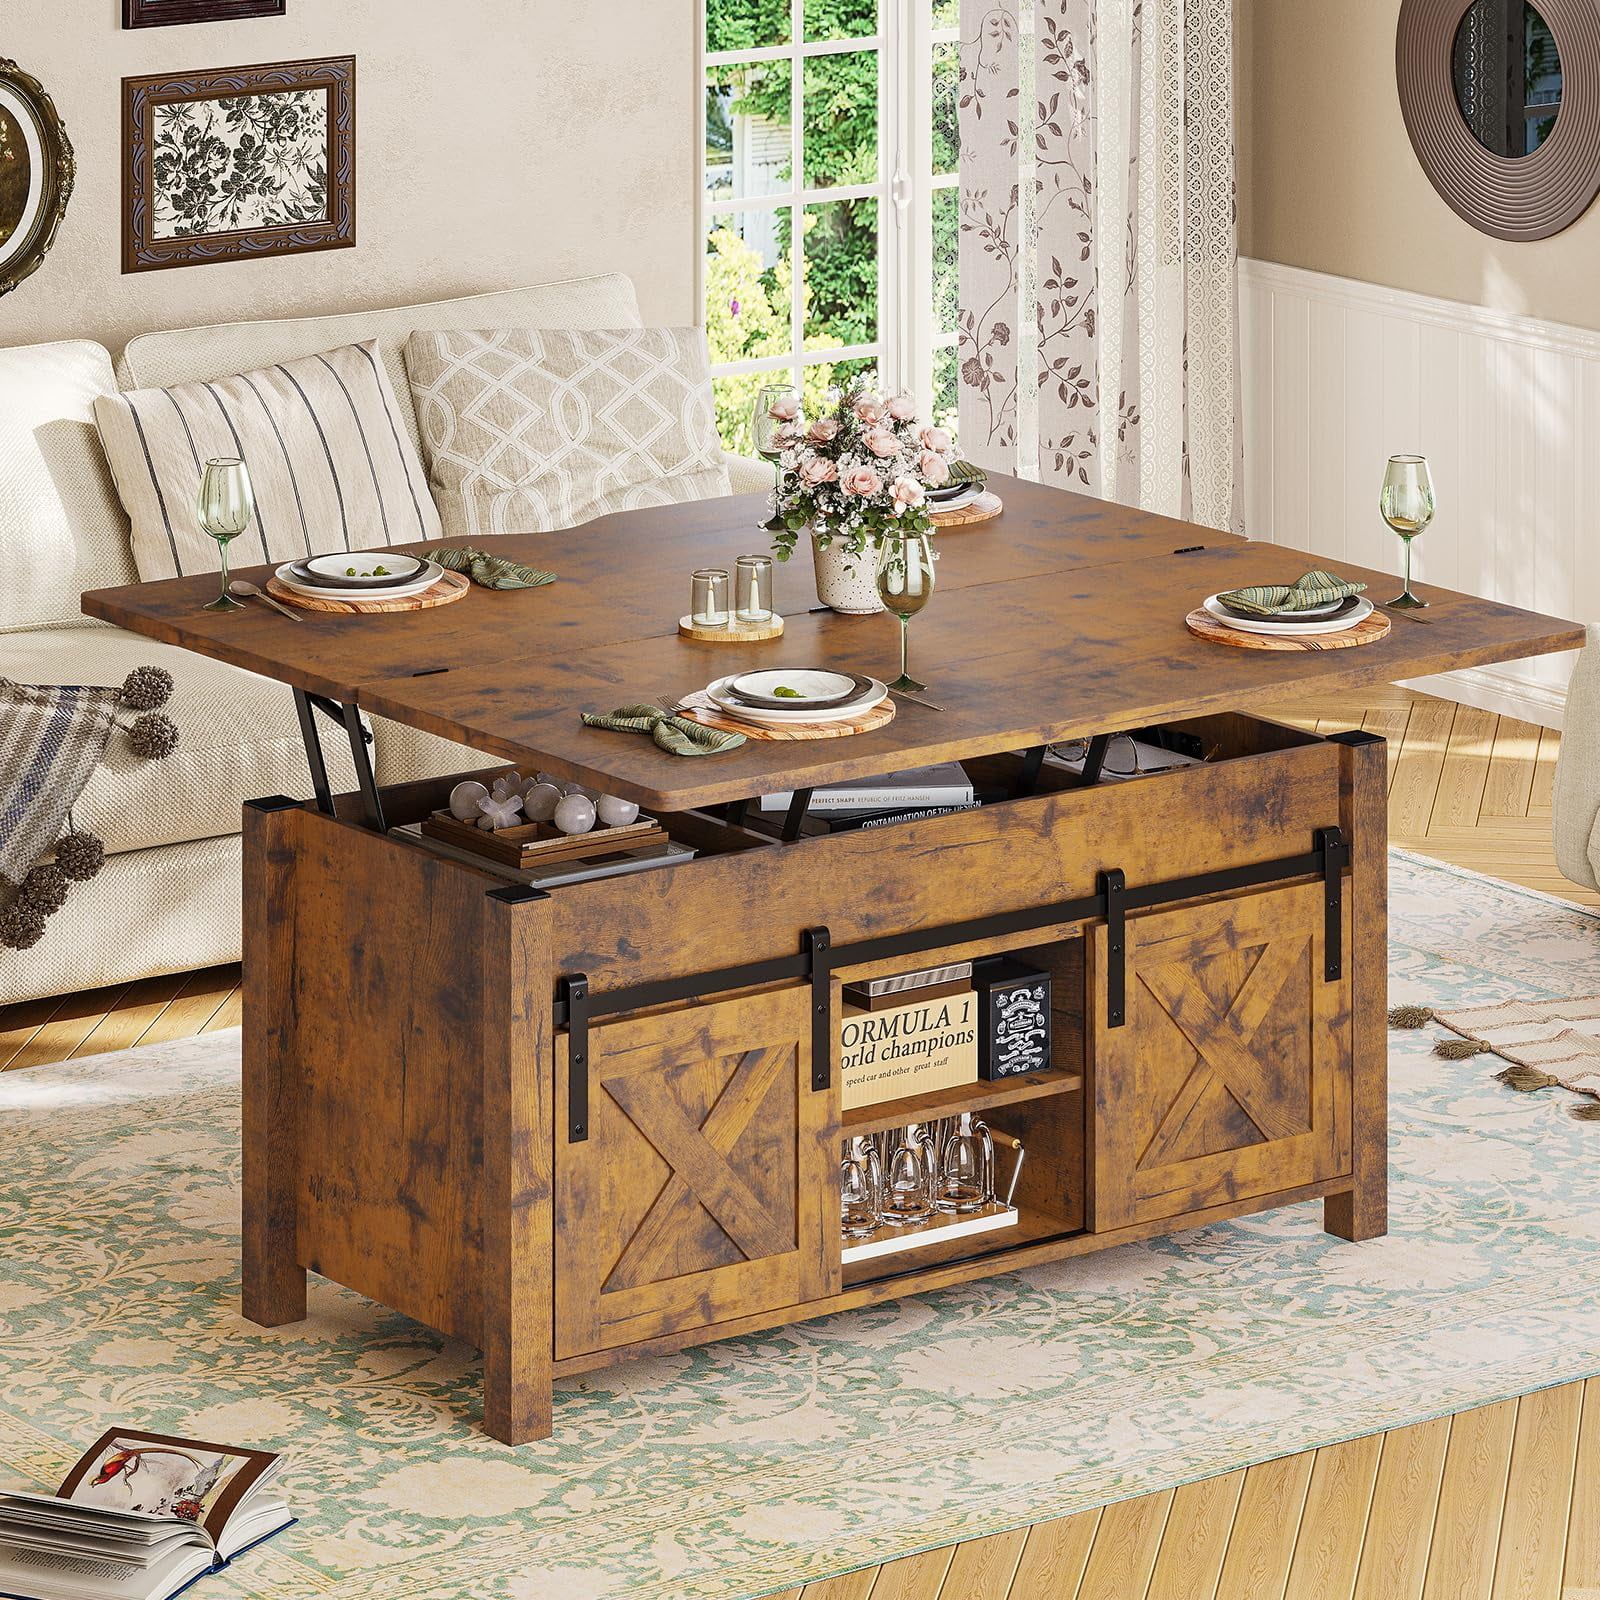 Coffee Table For Living Room, Farmhouse Lift Top Coffee Tables With Storage  And Hidden Compartment, Rising Tabletop Center Table For Living Room  Reception Room, Rustic Brown – Walmart Intended For Lift Top Coffee Tables With Storage (View 14 of 15)